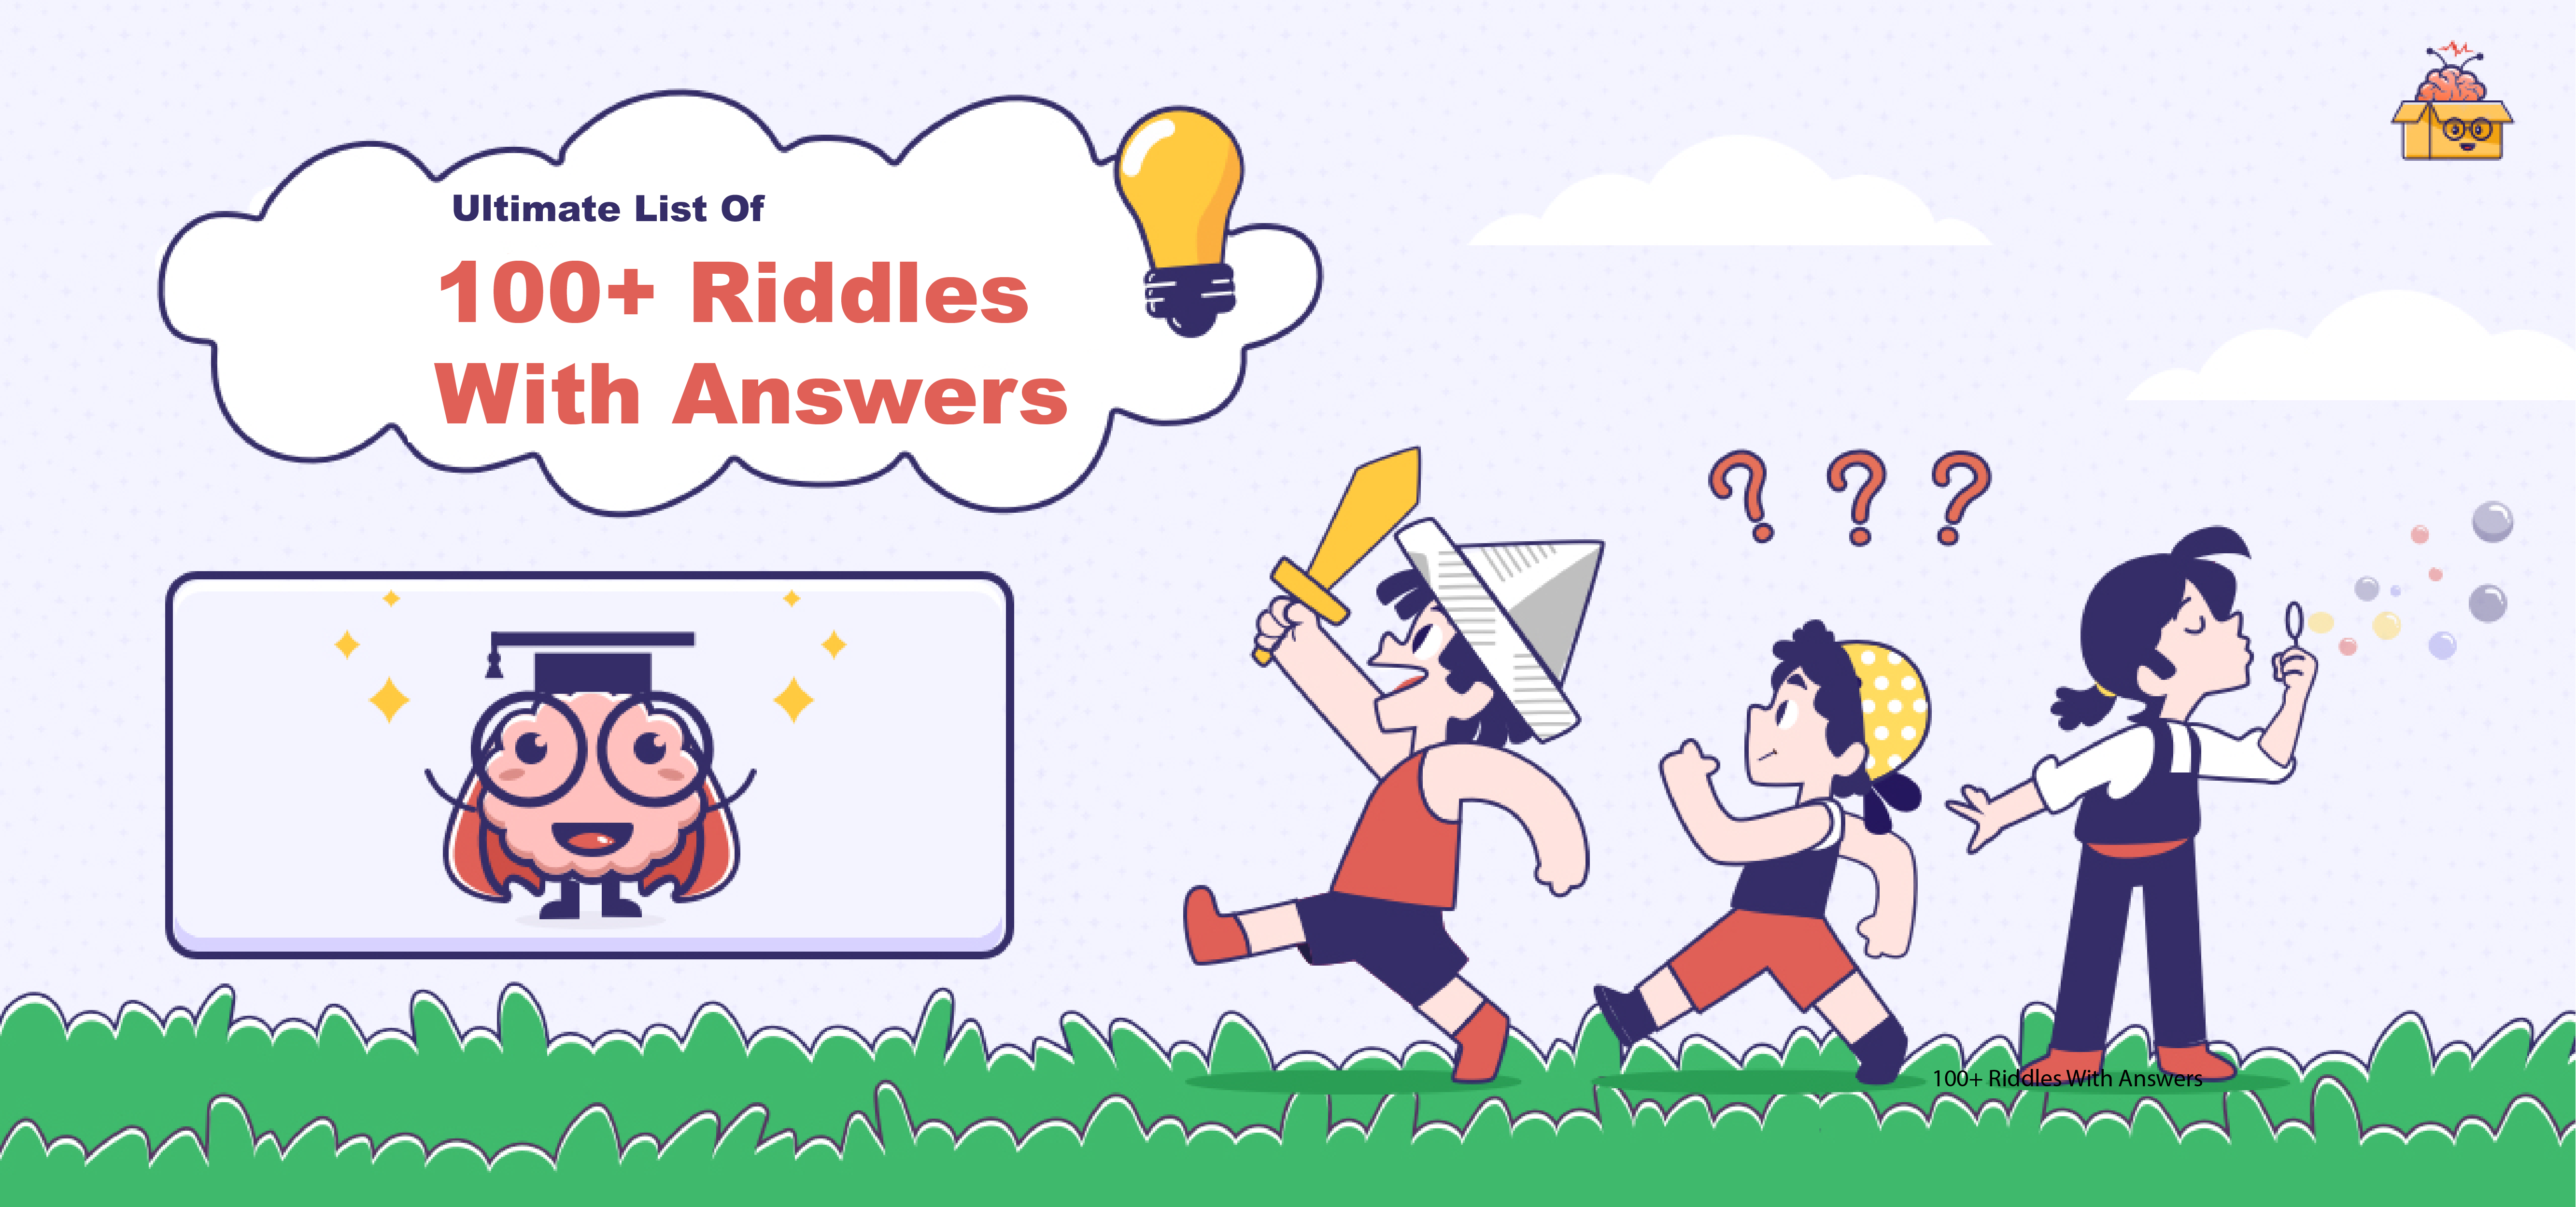 The Best Riddles For Smart Kids Book: Best Collection of Difficult